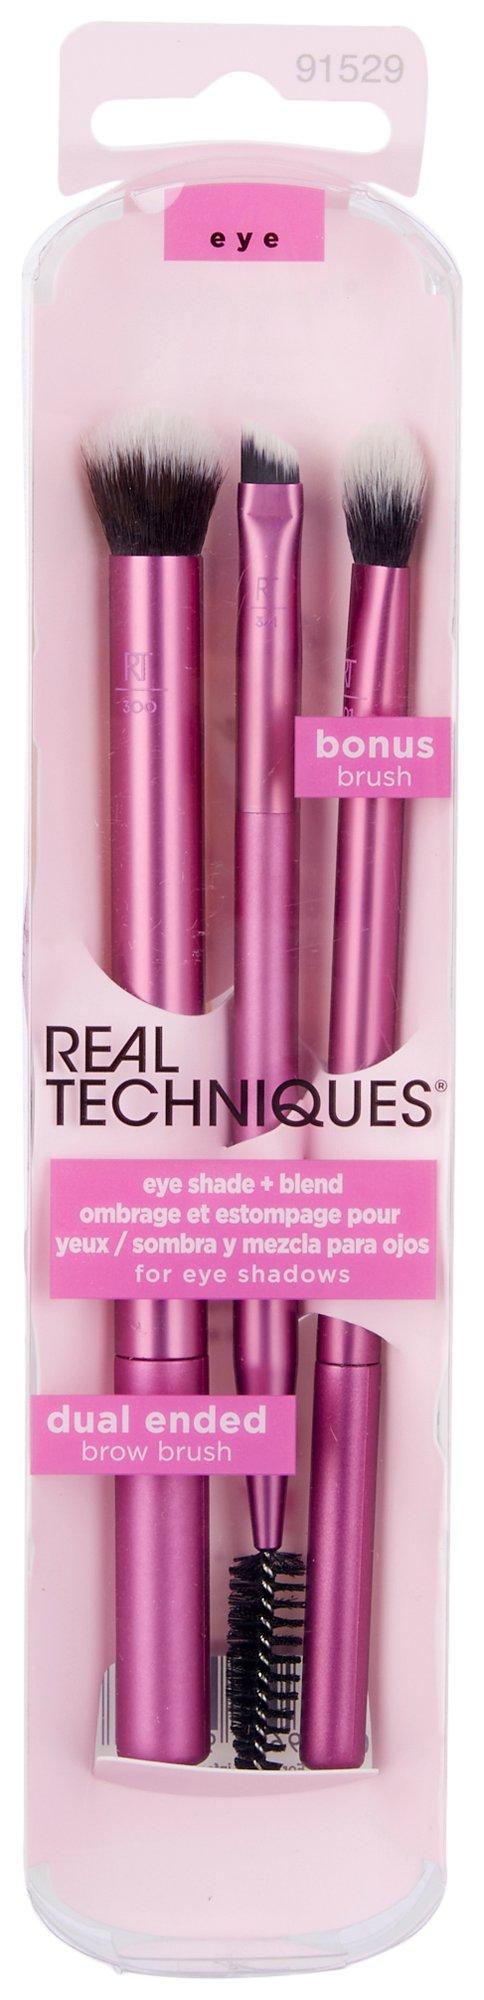 Real Techniques 3-Pc. Eye Shade & Blend Makeup